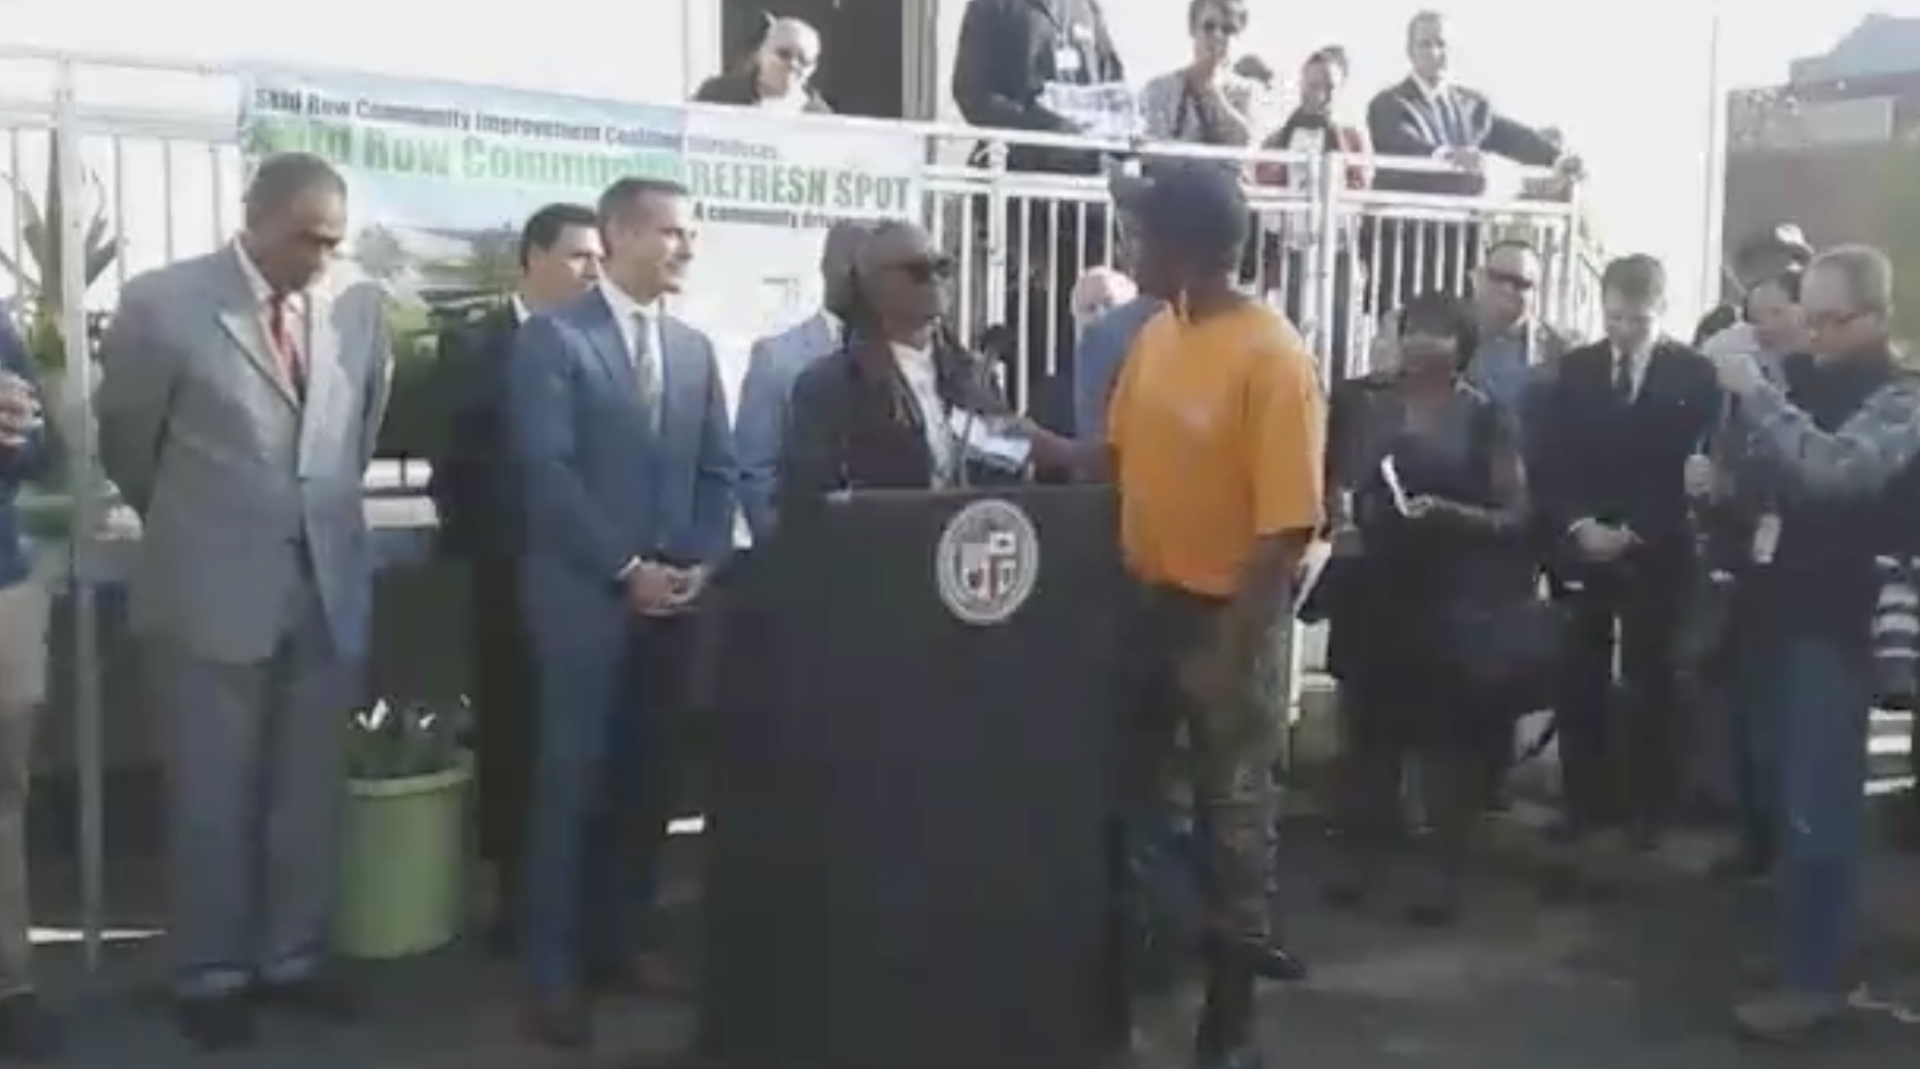 Garcetti holds a press conference in Skid Row to announce the opening of six bathrooms on Skid Row. Garcetti presented awards to community organizers who were strong advocates for the bathrooms including General Dogon of LA CAN who tears up the award in front of Garcetti.